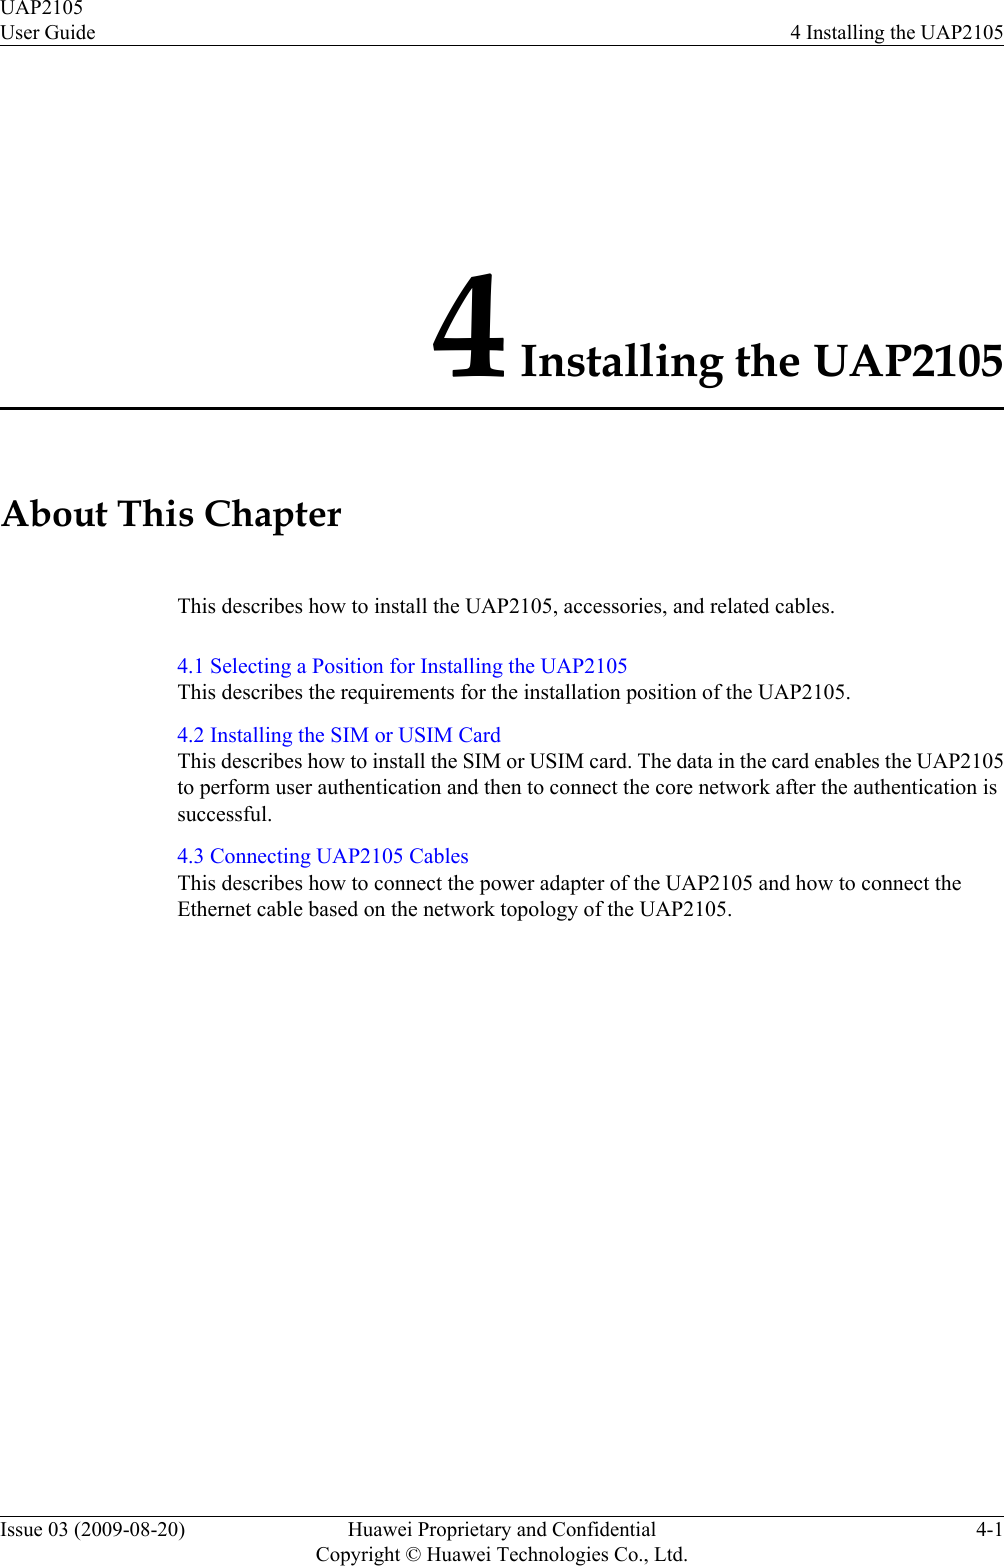 4 Installing the UAP2105About This ChapterThis describes how to install the UAP2105, accessories, and related cables.4.1 Selecting a Position for Installing the UAP2105This describes the requirements for the installation position of the UAP2105.4.2 Installing the SIM or USIM CardThis describes how to install the SIM or USIM card. The data in the card enables the UAP2105to perform user authentication and then to connect the core network after the authentication issuccessful.4.3 Connecting UAP2105 CablesThis describes how to connect the power adapter of the UAP2105 and how to connect theEthernet cable based on the network topology of the UAP2105.UAP2105User Guide 4 Installing the UAP2105Issue 03 (2009-08-20) Huawei Proprietary and ConfidentialCopyright © Huawei Technologies Co., Ltd.4-1